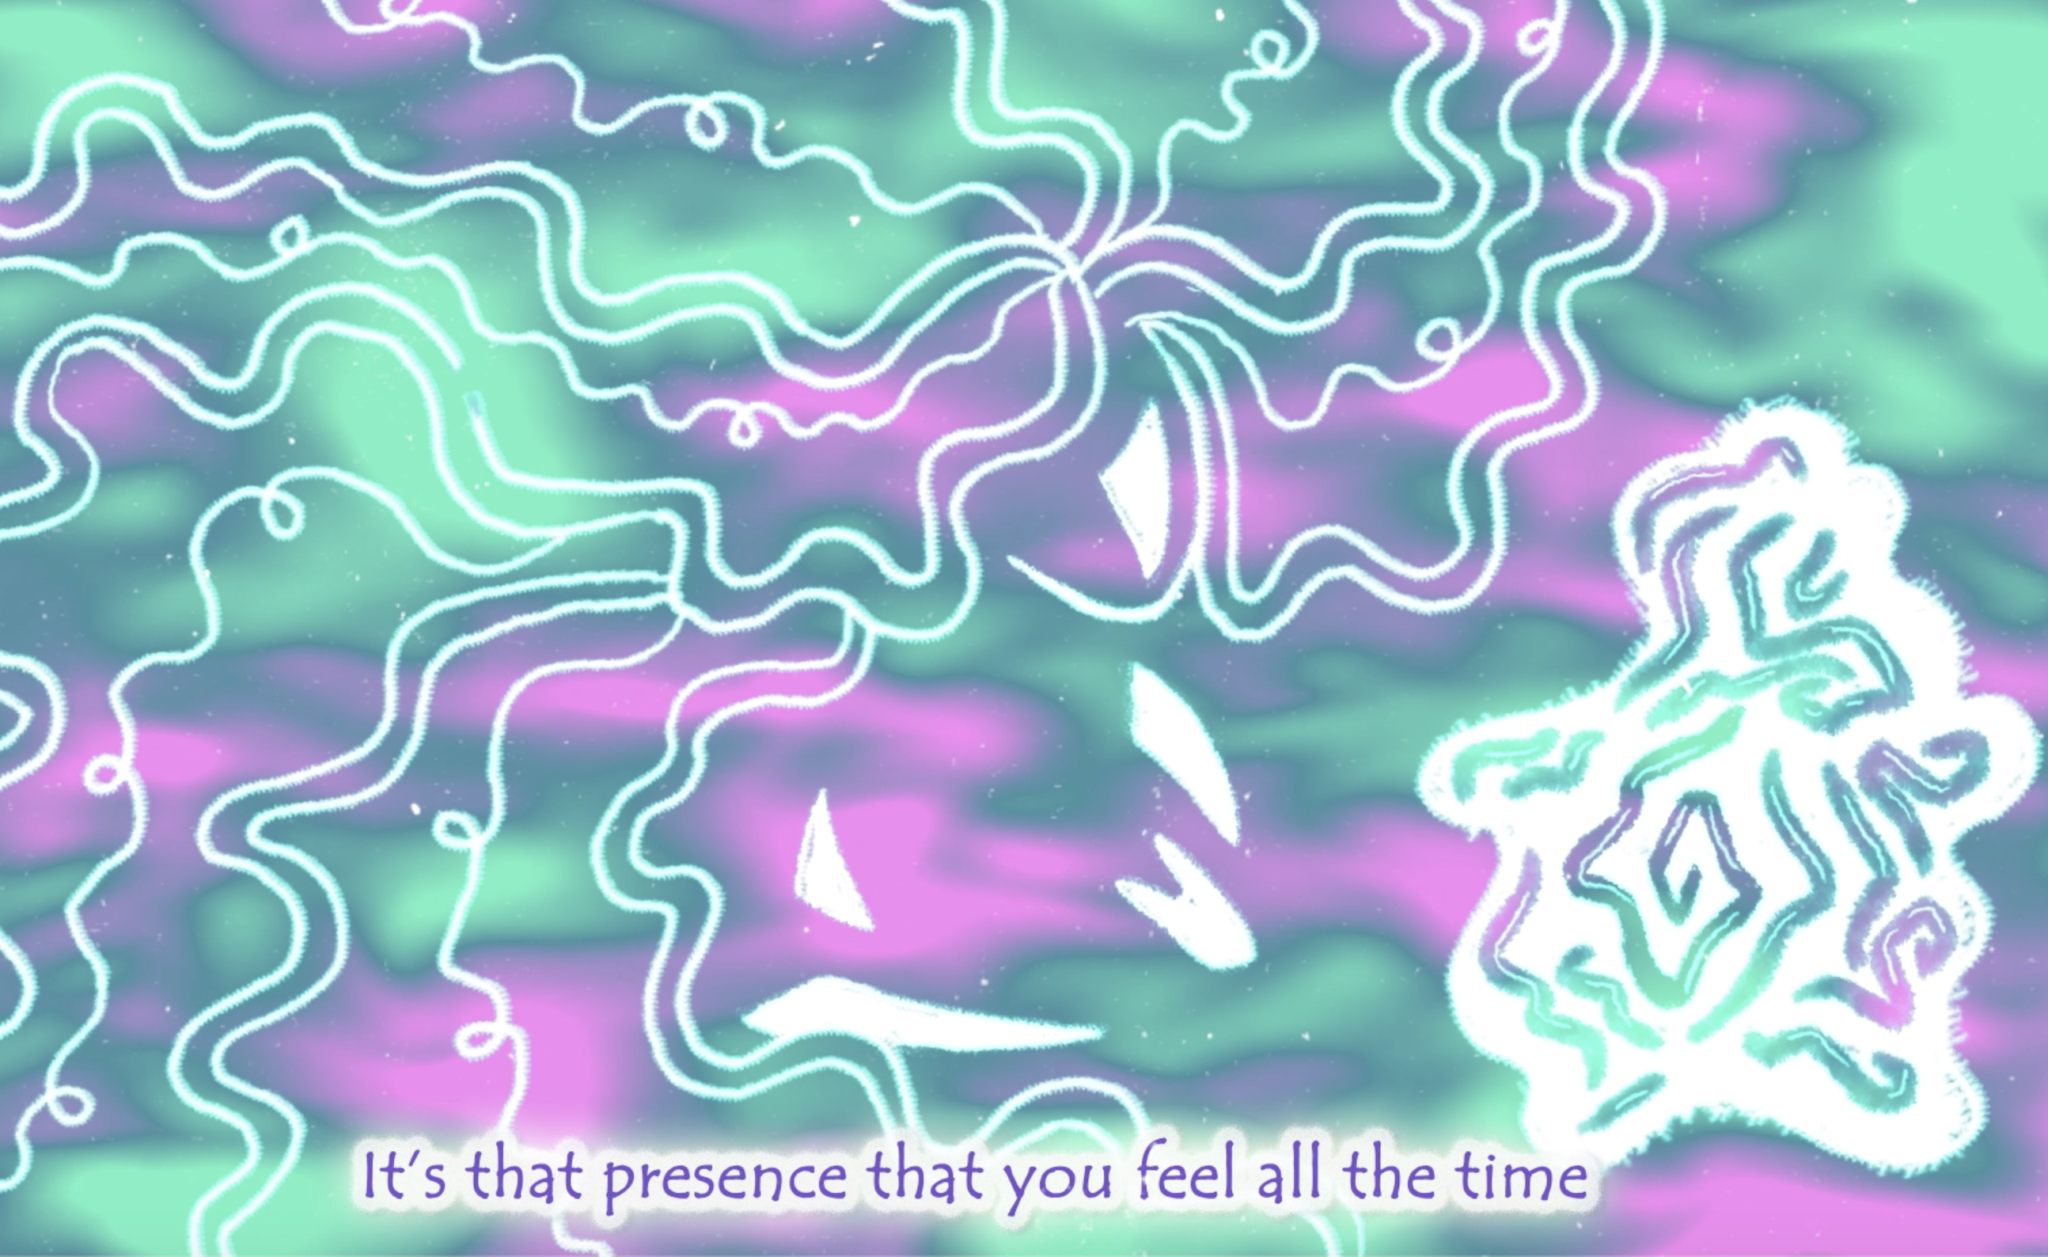 a still from an animated film shows a green and pink galaxy overlaid with a white cut out image of a face with wiggly lines on it. The person has huge wavy hair illustrated by white lines which spread across the screen. Lilac text at the bottom of the screen says ‘its that presence you feel all the time’